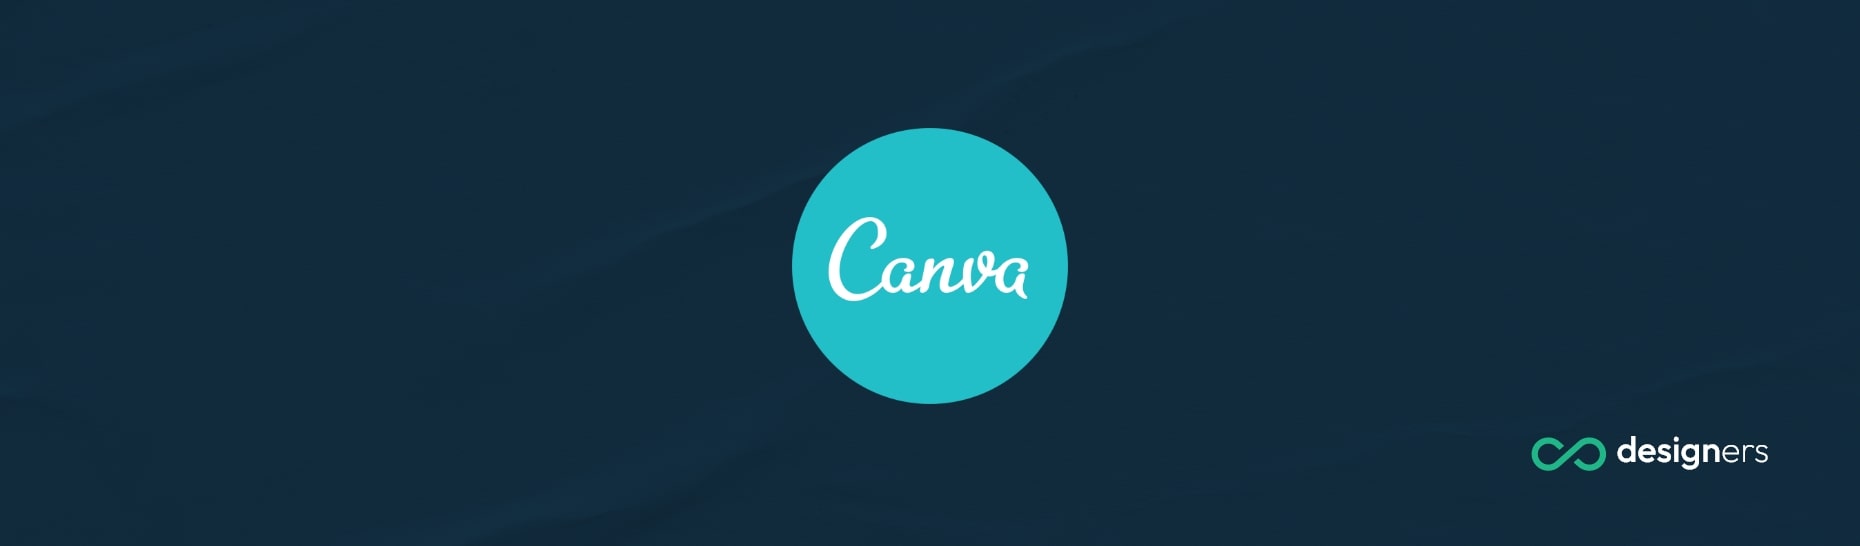 What Is the Size of Banner in Canva?